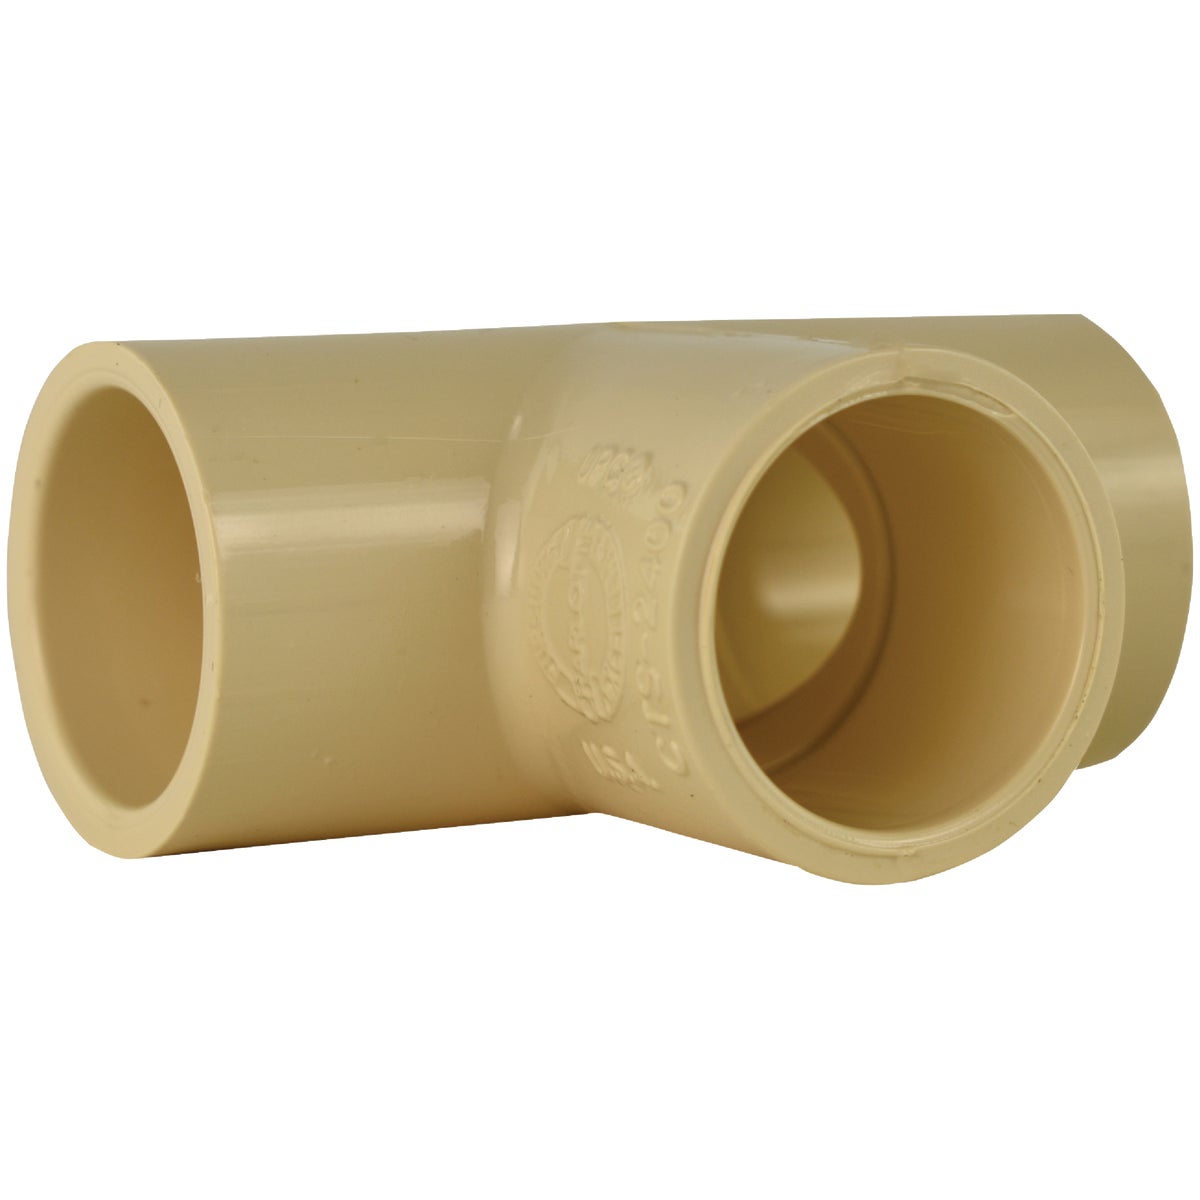 Charlotte Pipe 3/4 In. x 3/4 In. x 3/4 In. Solvent Weldable CPVC Tee